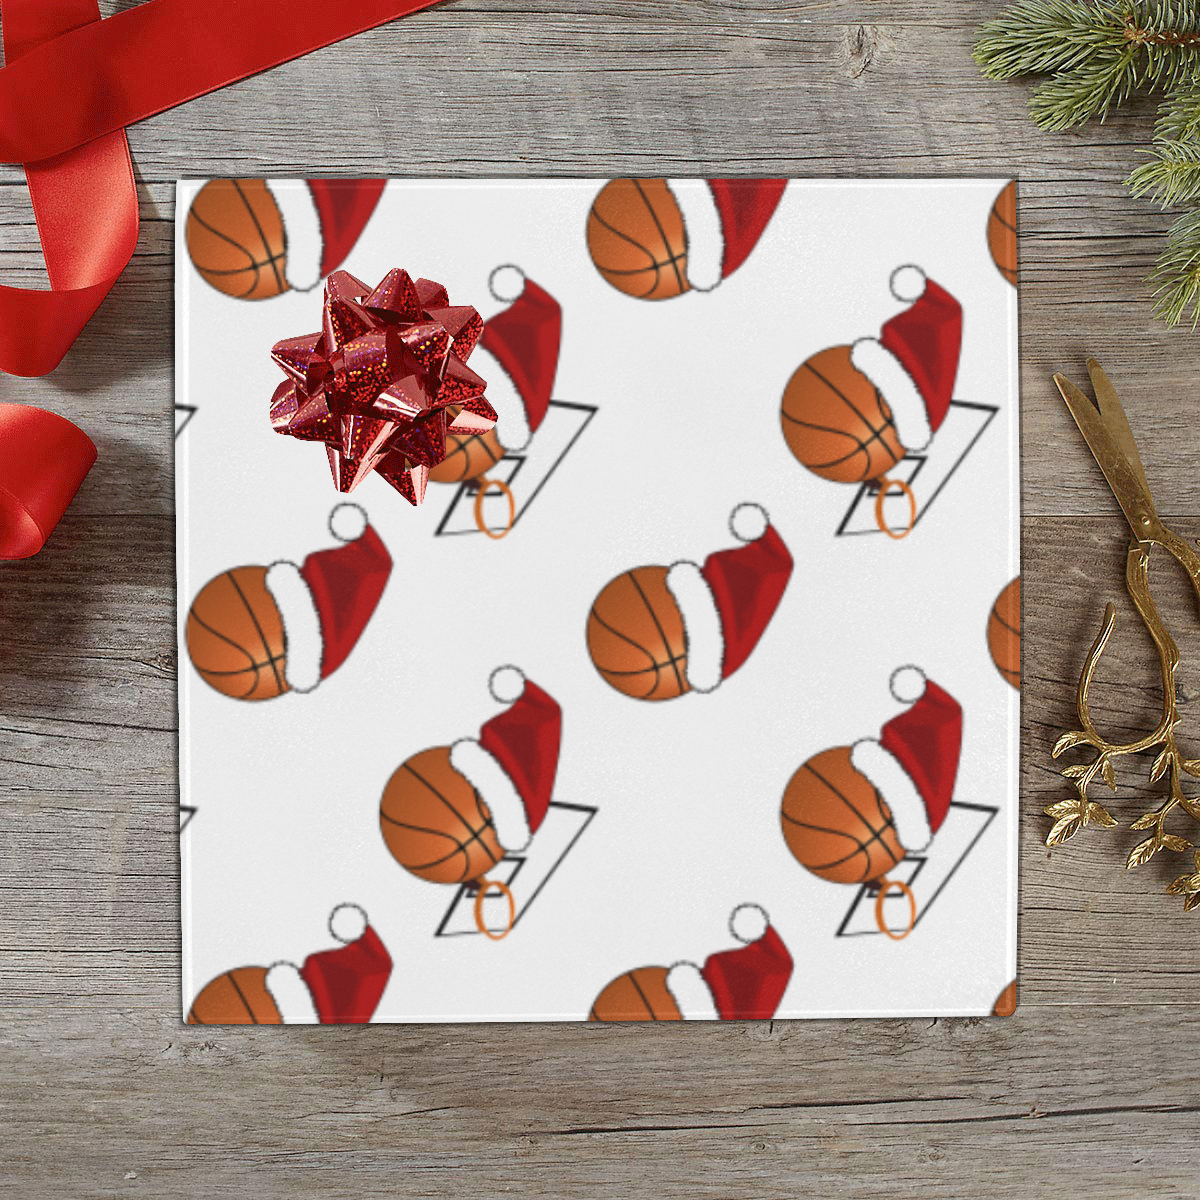  Artsadd Personalized Gift Wrapping Paper Christmas